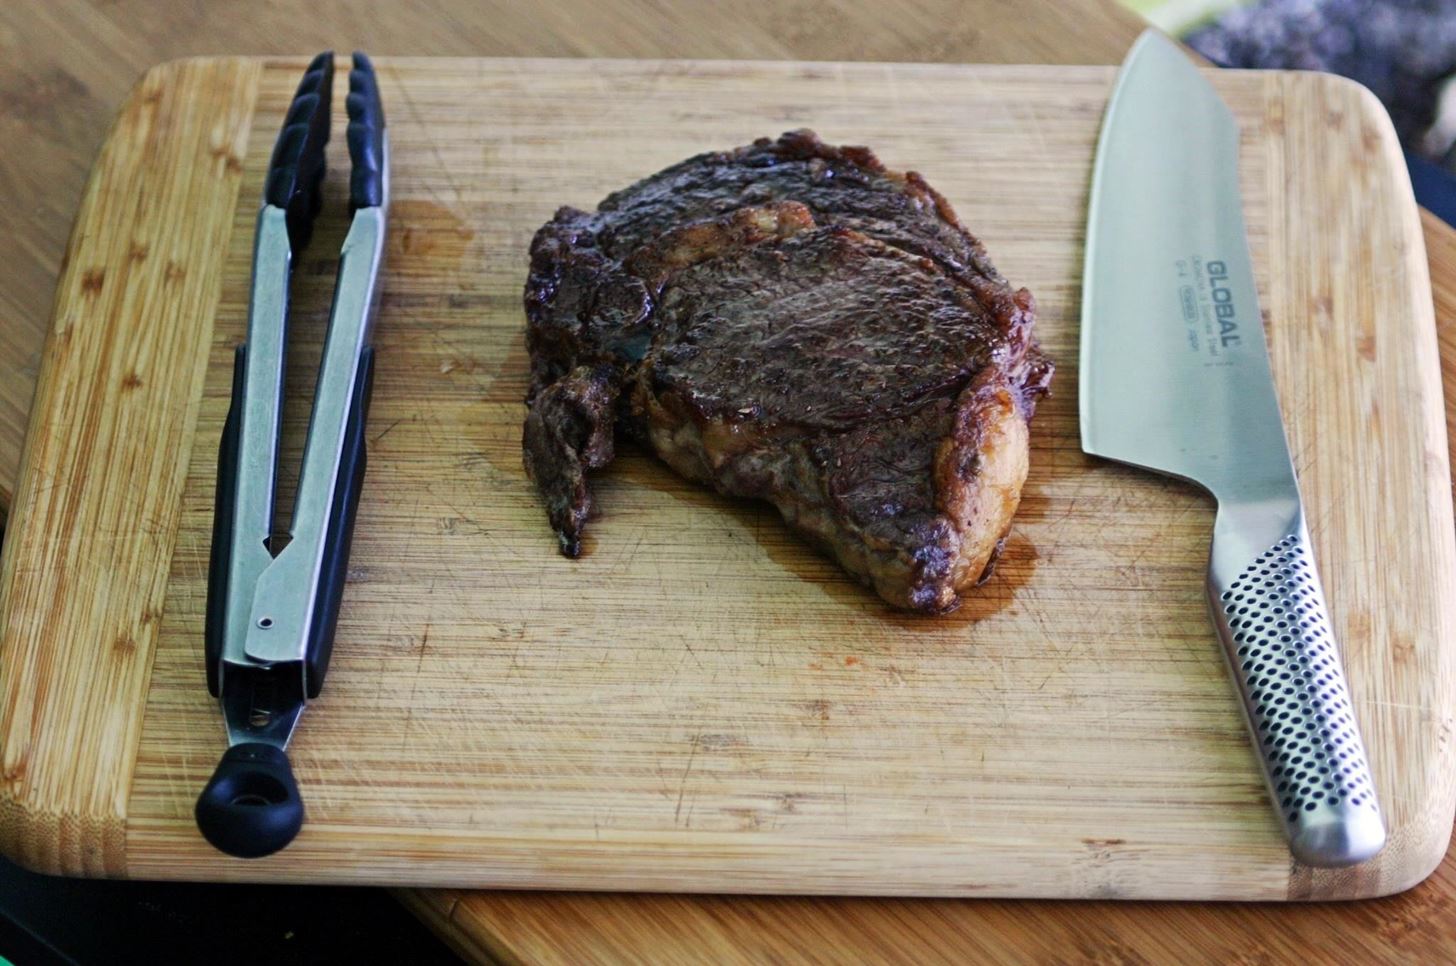 How to Tell if Your Steak Is Done Without Using a Thermometer